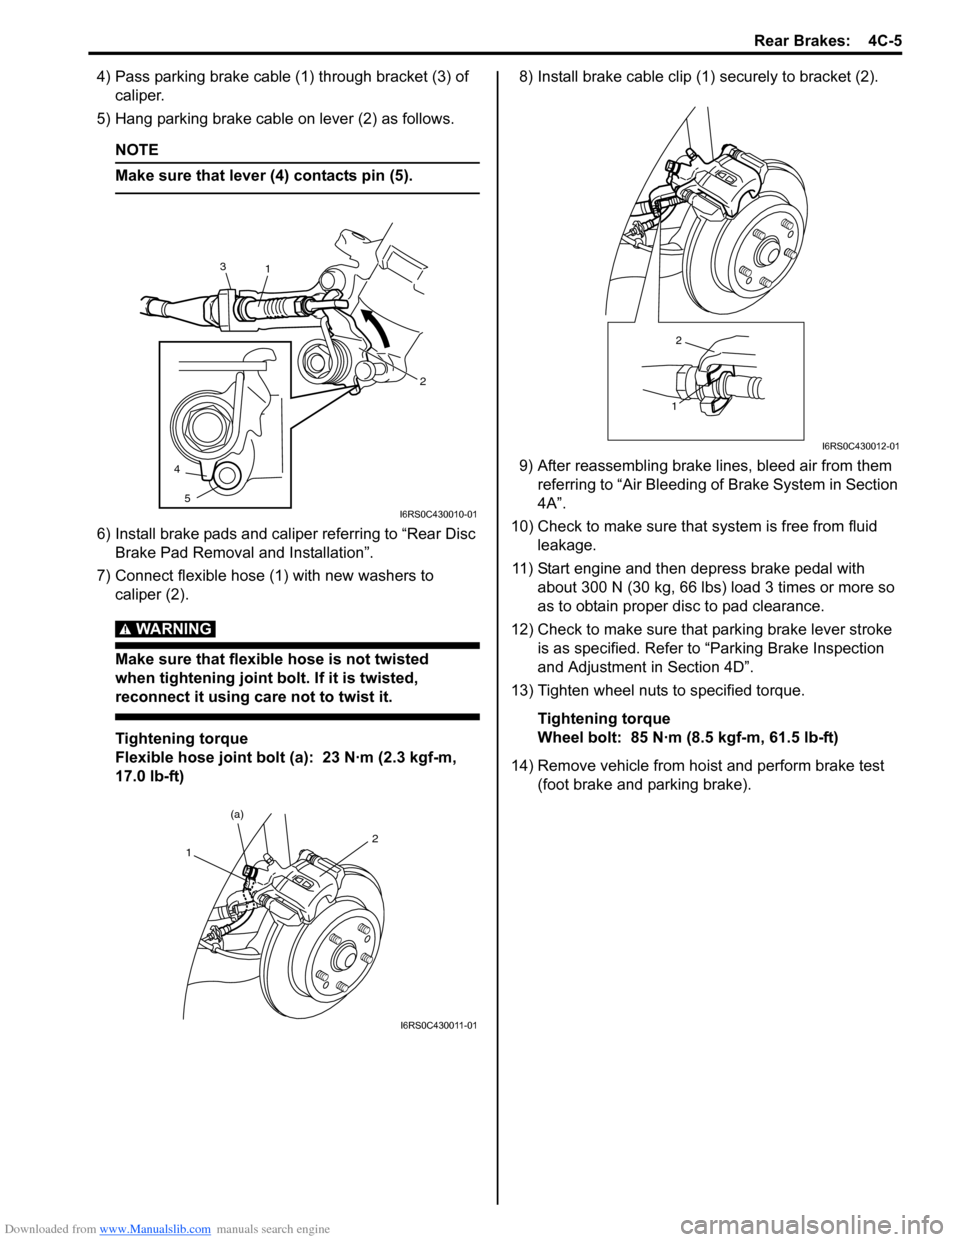 SUZUKI SWIFT 2004 2.G Service Workshop Manual Downloaded from www.Manualslib.com manuals search engine Rear Brakes:  4C-5
4) Pass parking brake cable (1) through bracket (3) of caliper.
5) Hang parking brake cable on lever (2) as follows.
NOTE
Ma